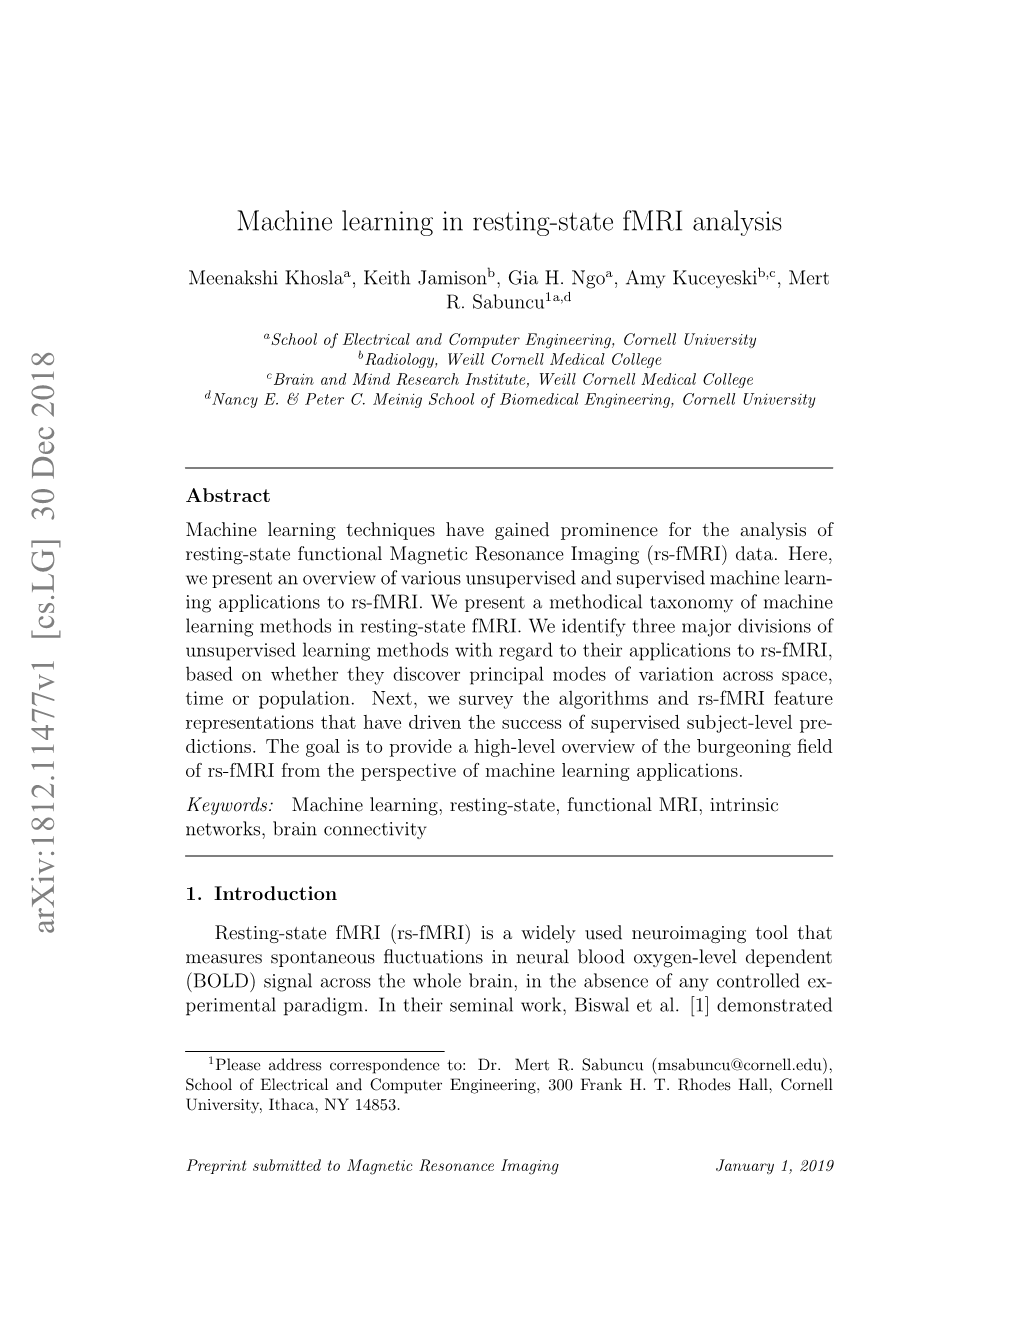 Machine Learning in Resting-State Fmri Analysis